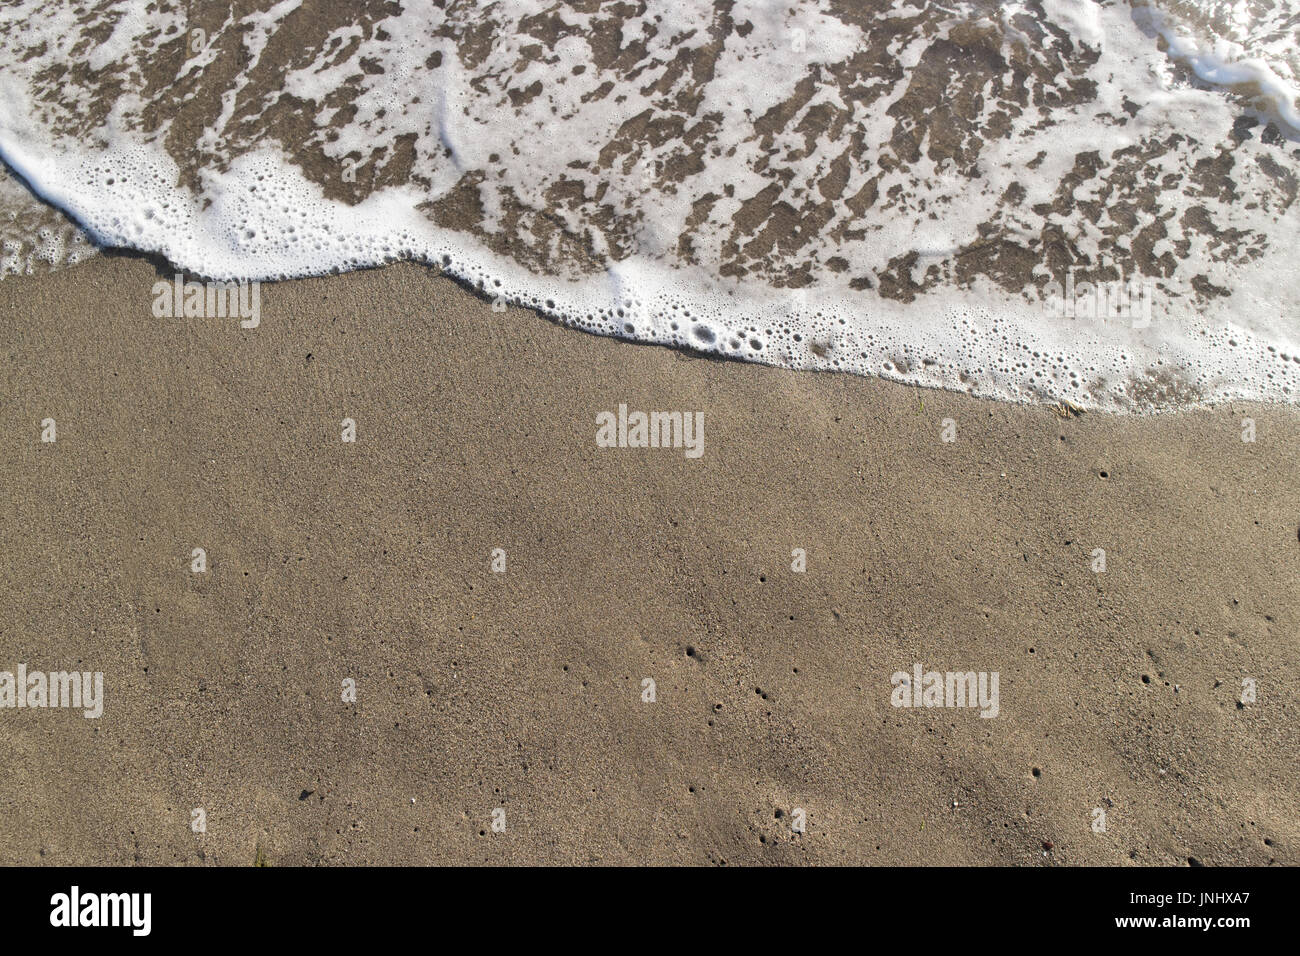 Sandy beach with small waves - tuscany impressions Stock Photo